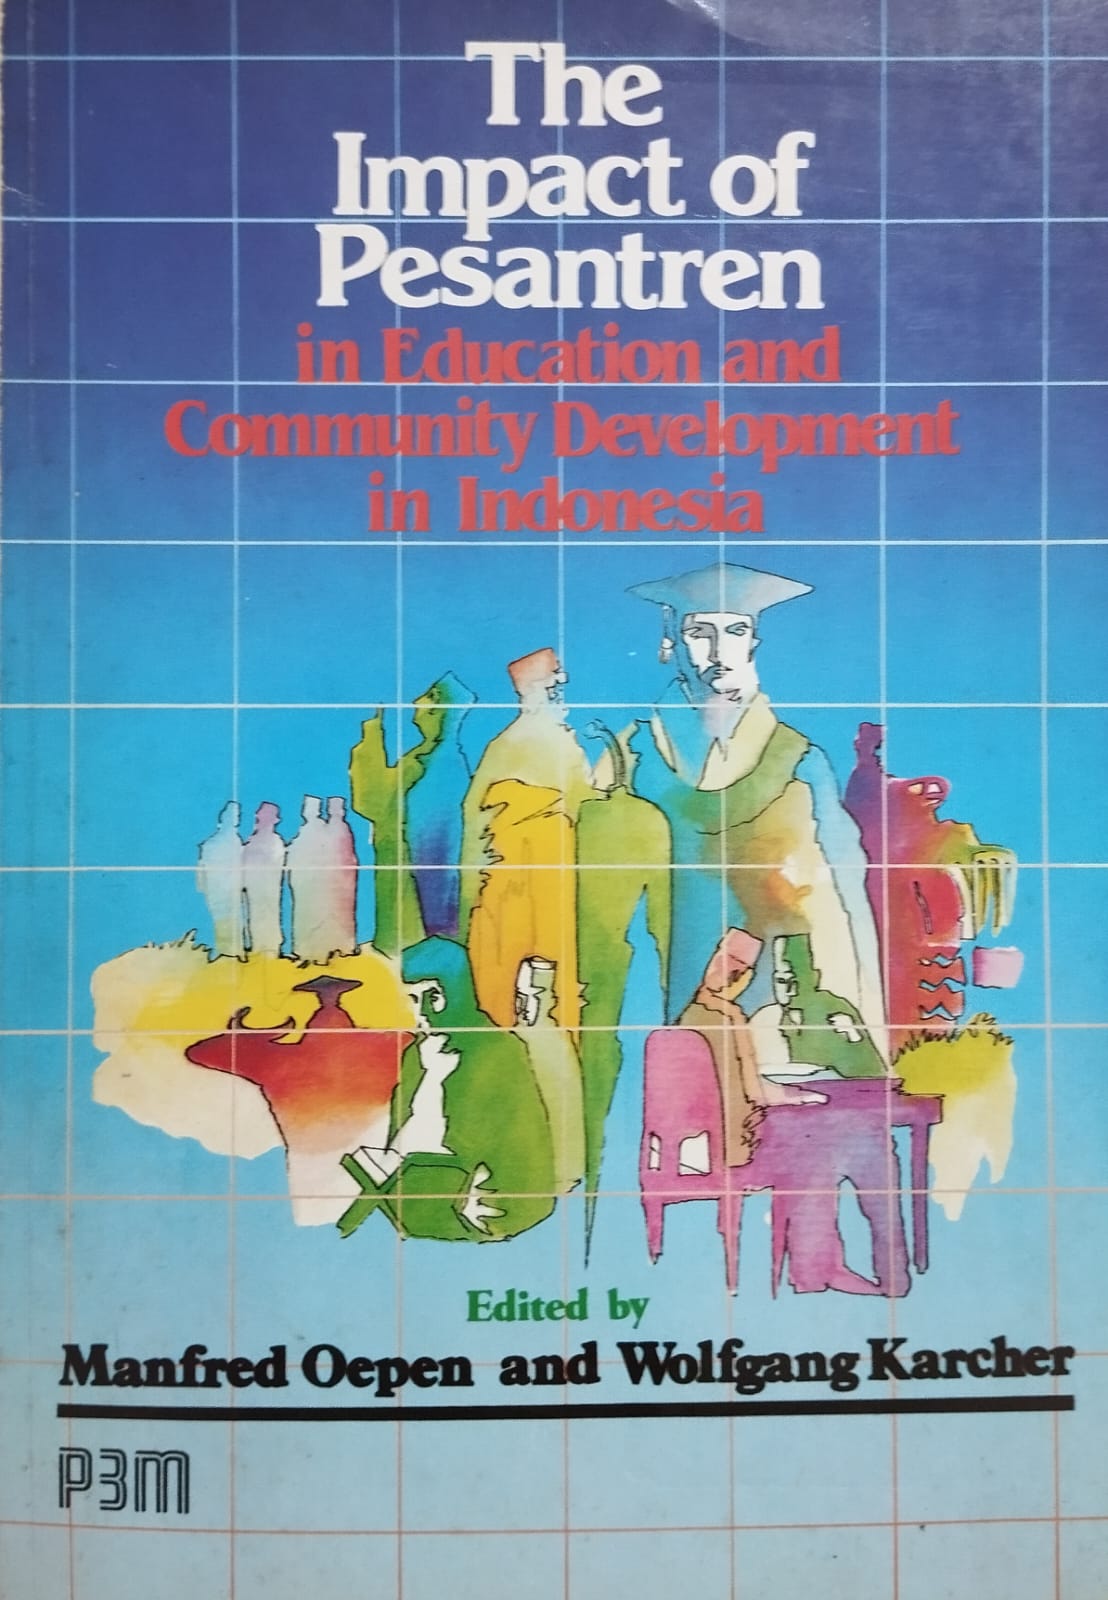 The Impact of Pesantren in Education and Community Development in Indonesia